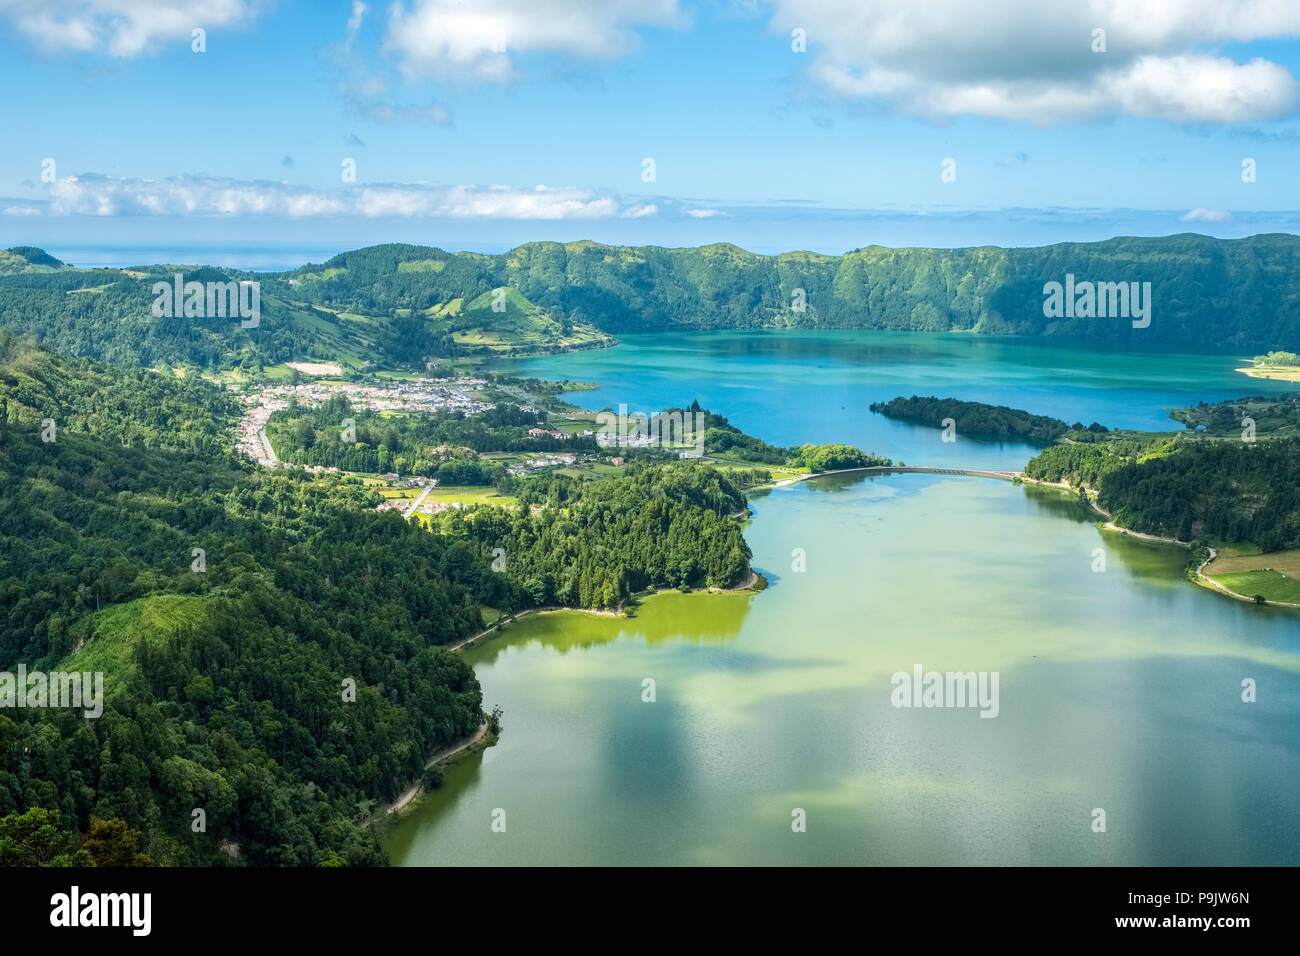 Sete Cidades, two lakes and a village in the dormant crater of a volcano on the island of Sao Miguel, The Azores Stock Photo